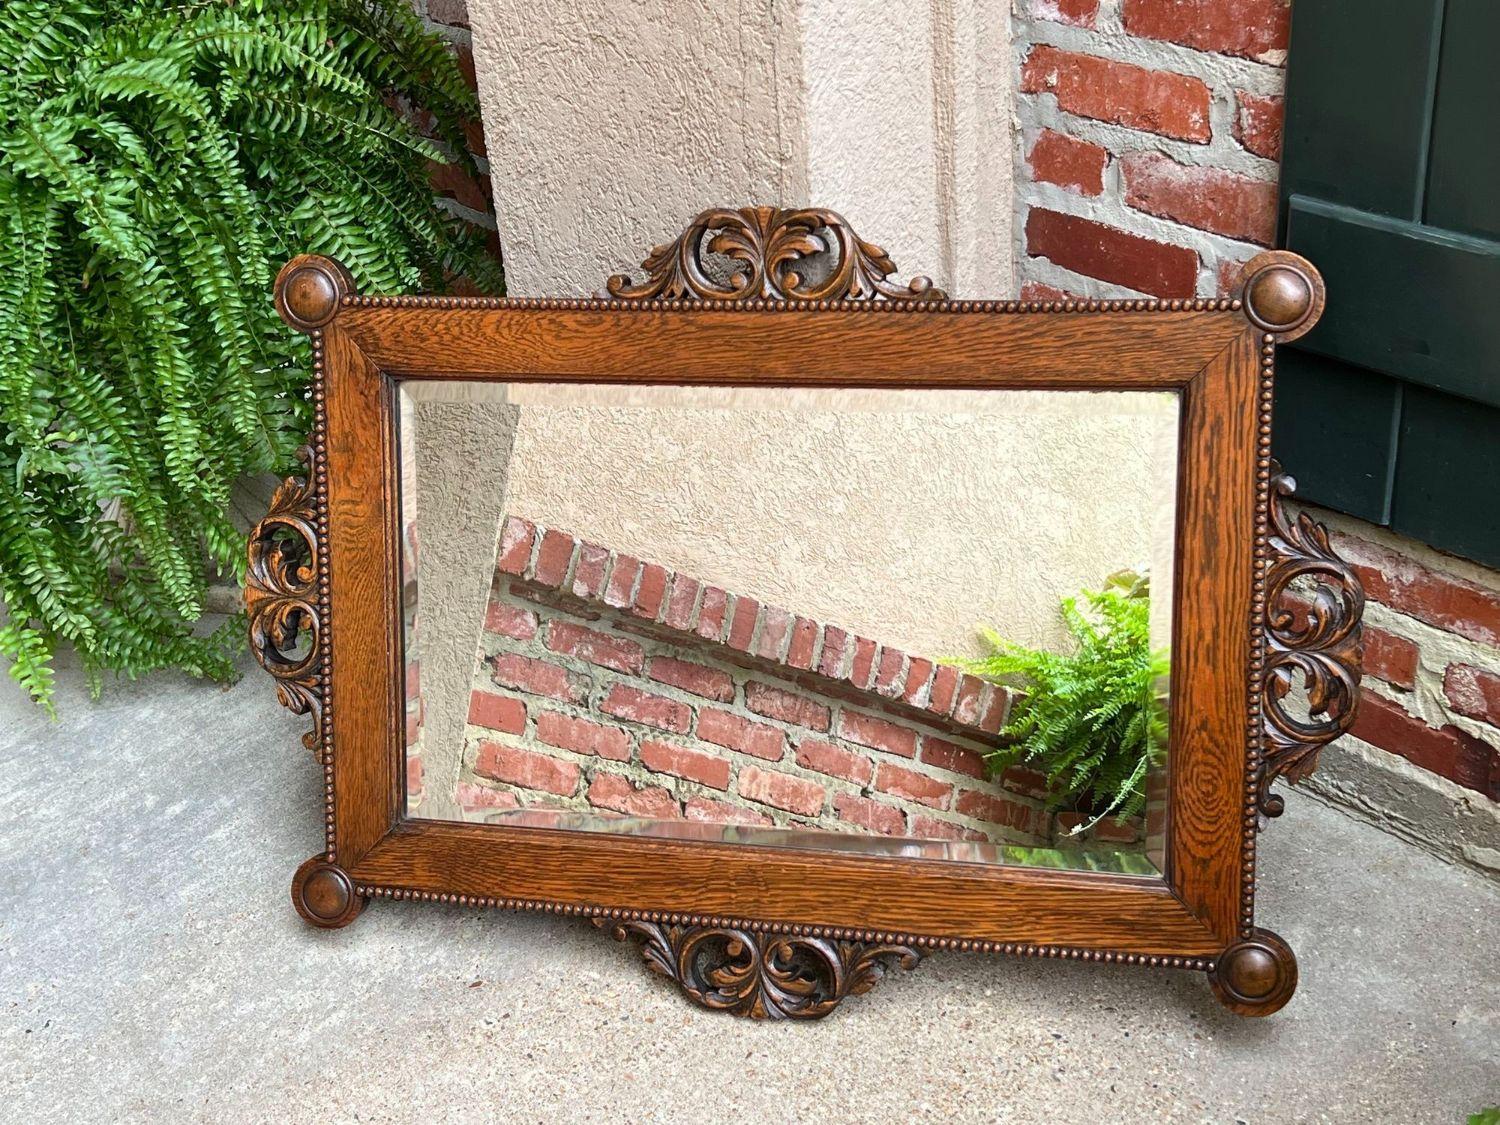 Antique English Beveled Wall Mirror Carved Oak Frame Jacobean Arts & Crafts.

Direct from England, another fabulous antique English wall mirror!
The large rectangular frame features a wide, tiger oak band with beaded trim on the outer edges, ornate